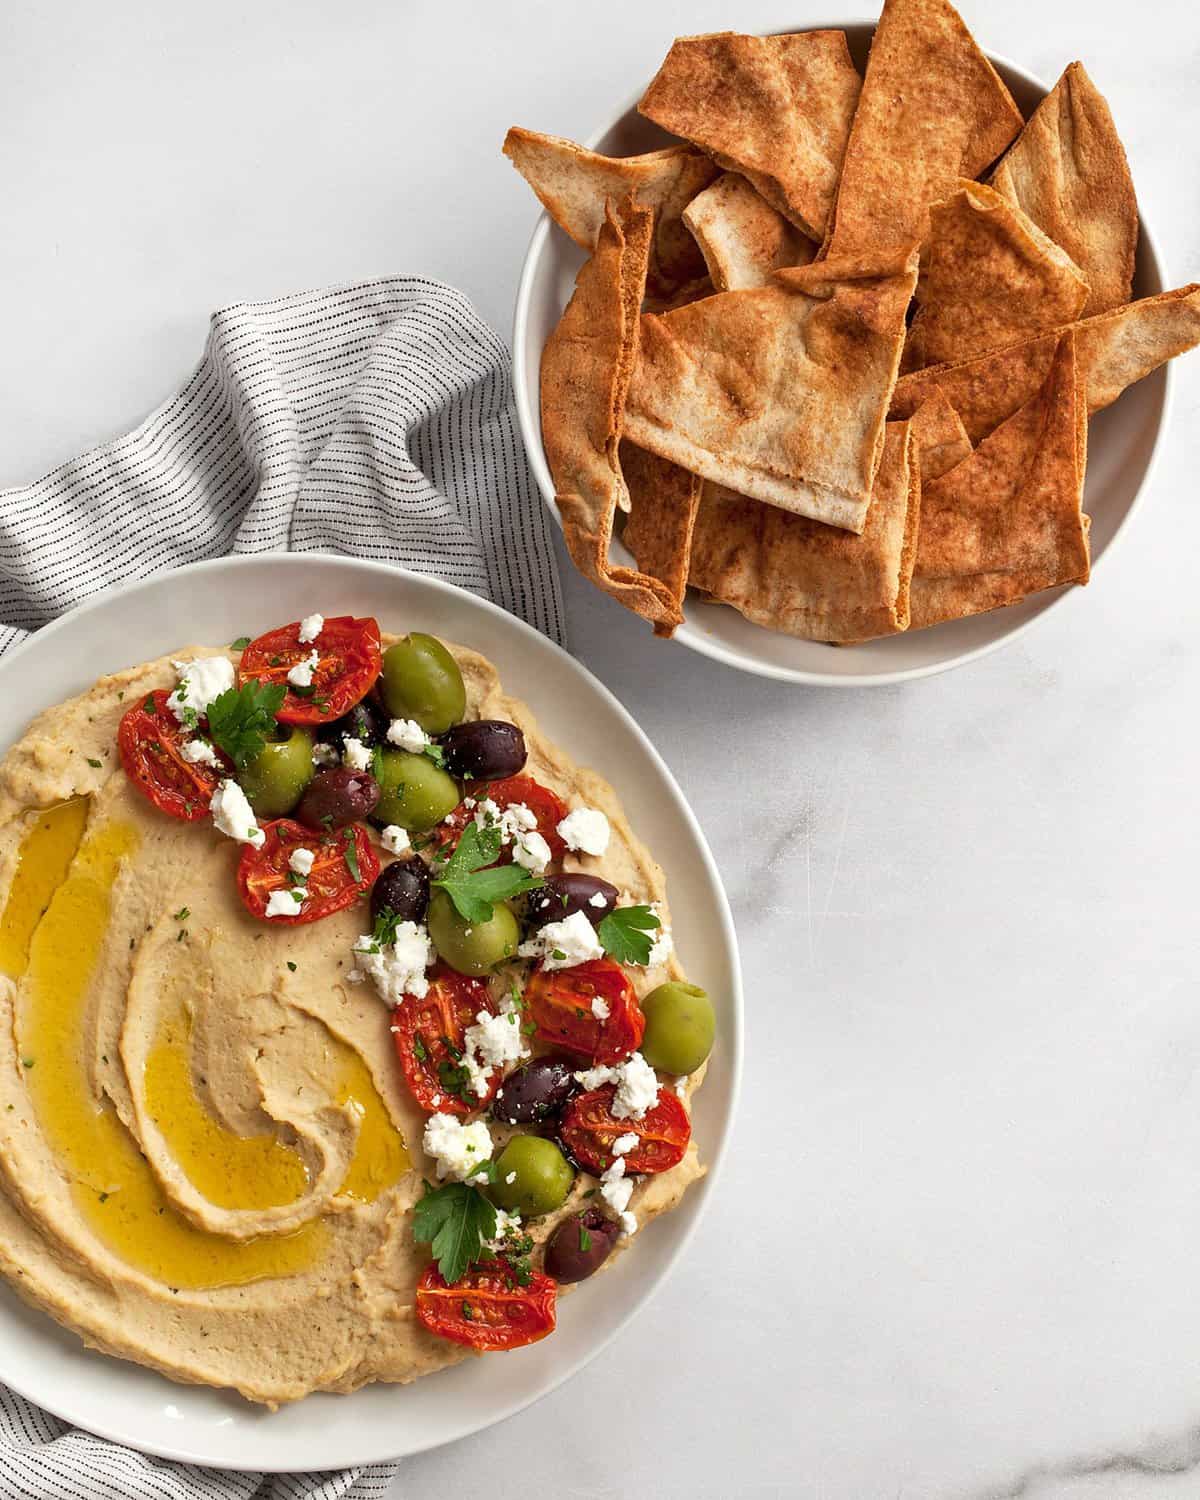 Roasted garlic hummus on a plate served with pita chips.